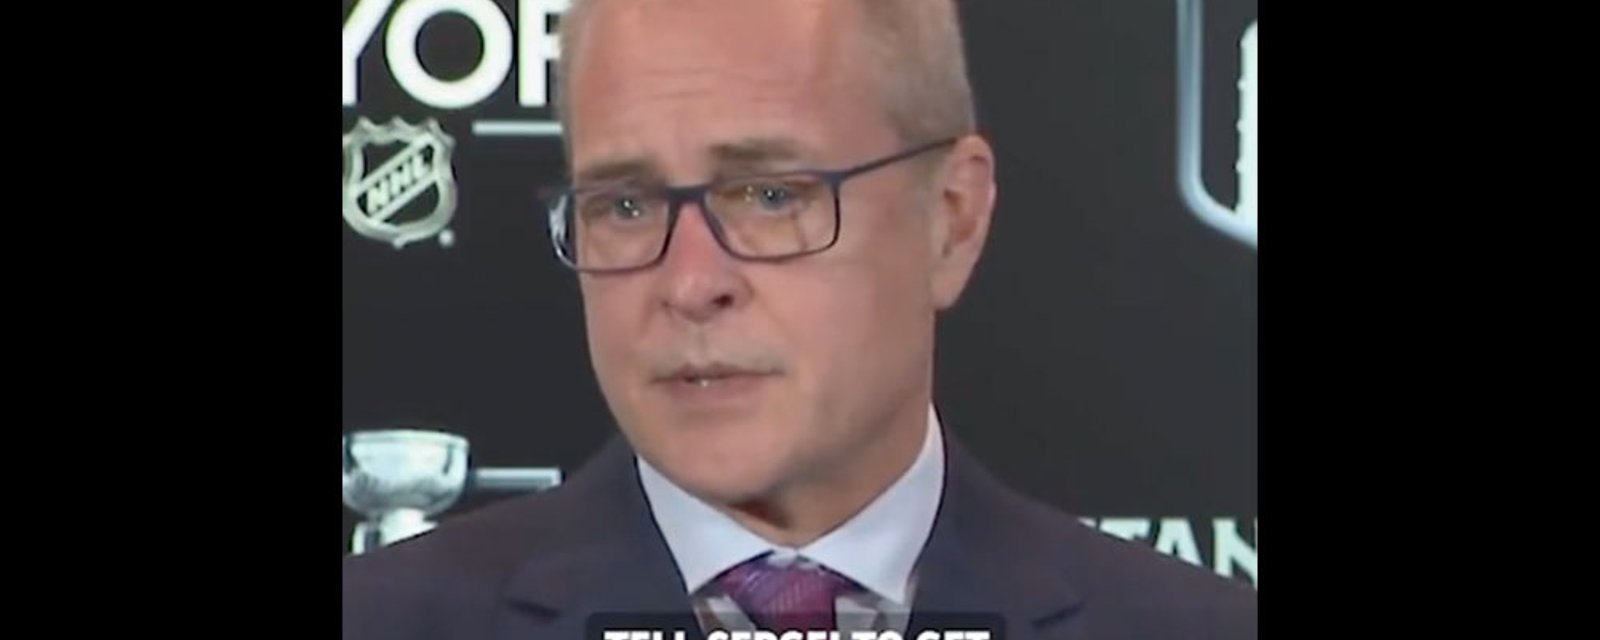 Paul Maurice goes off on rant against referees following Game 1 win